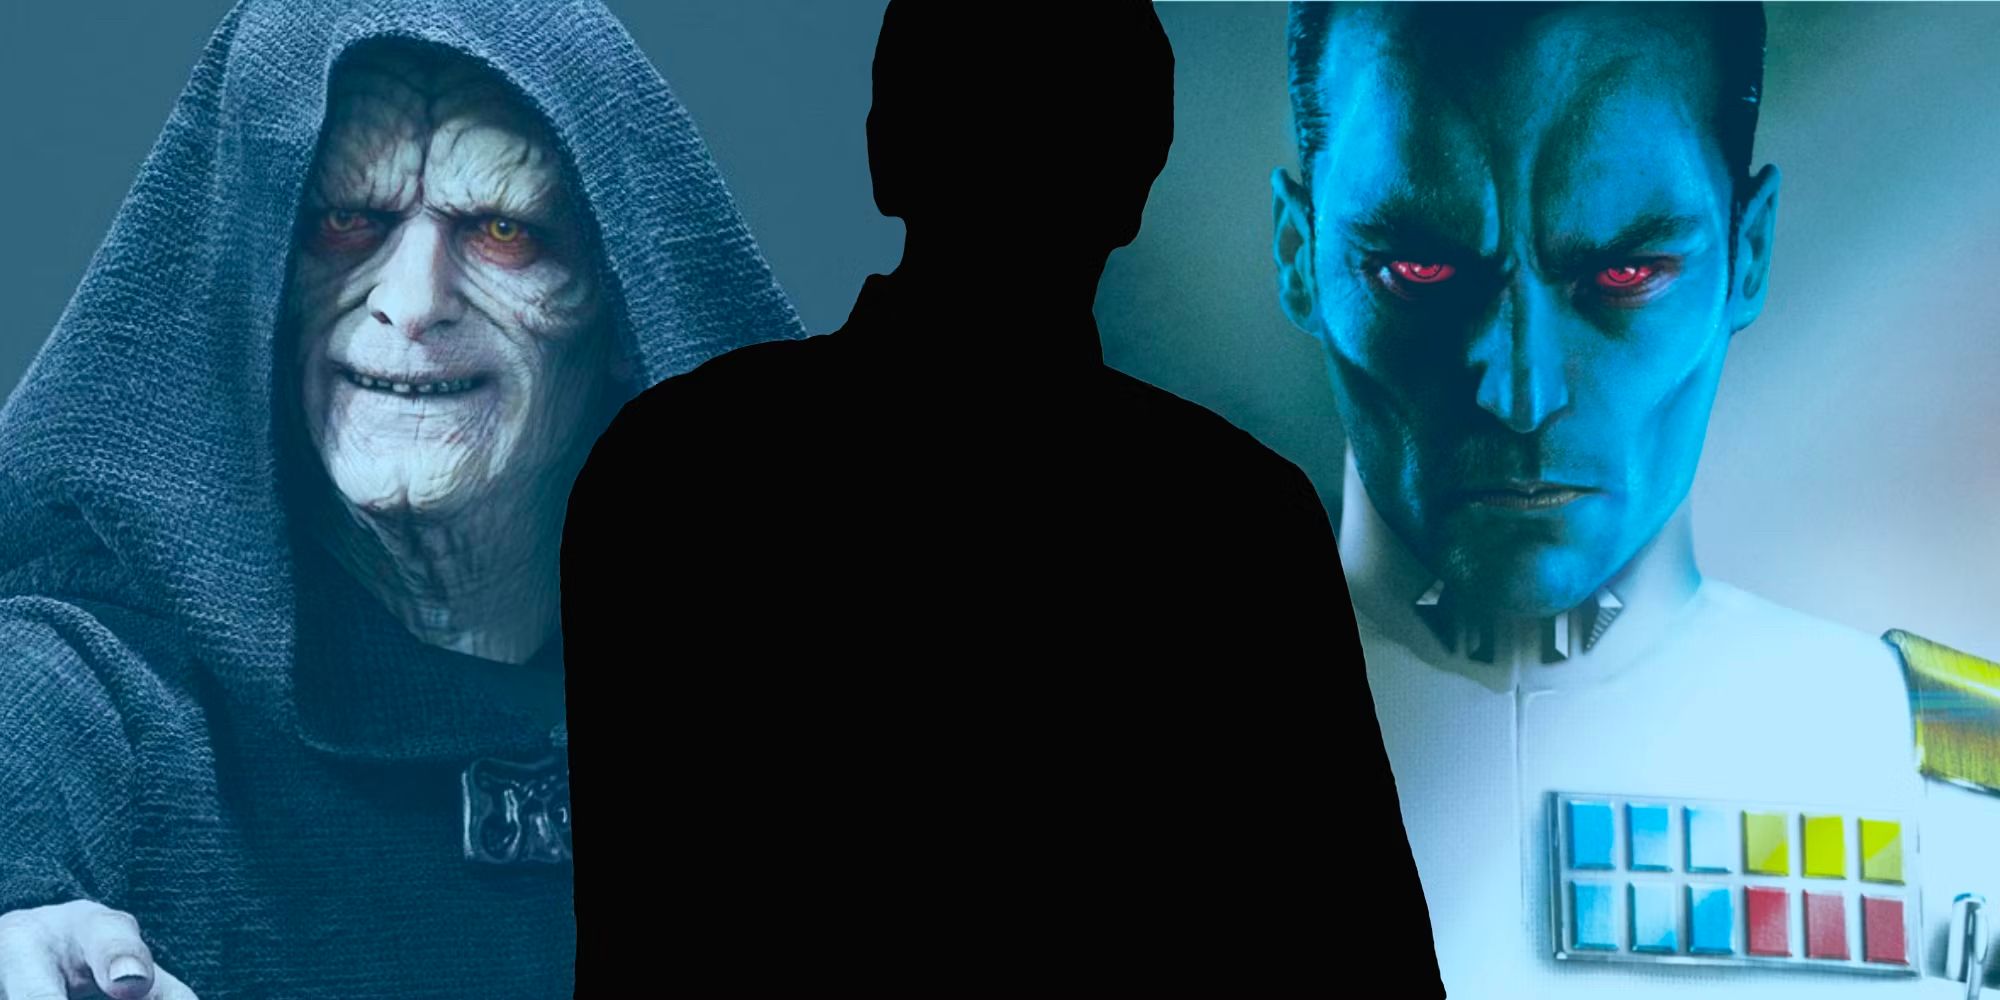 Emperor Palpatine, mysterious character, and Thrawn